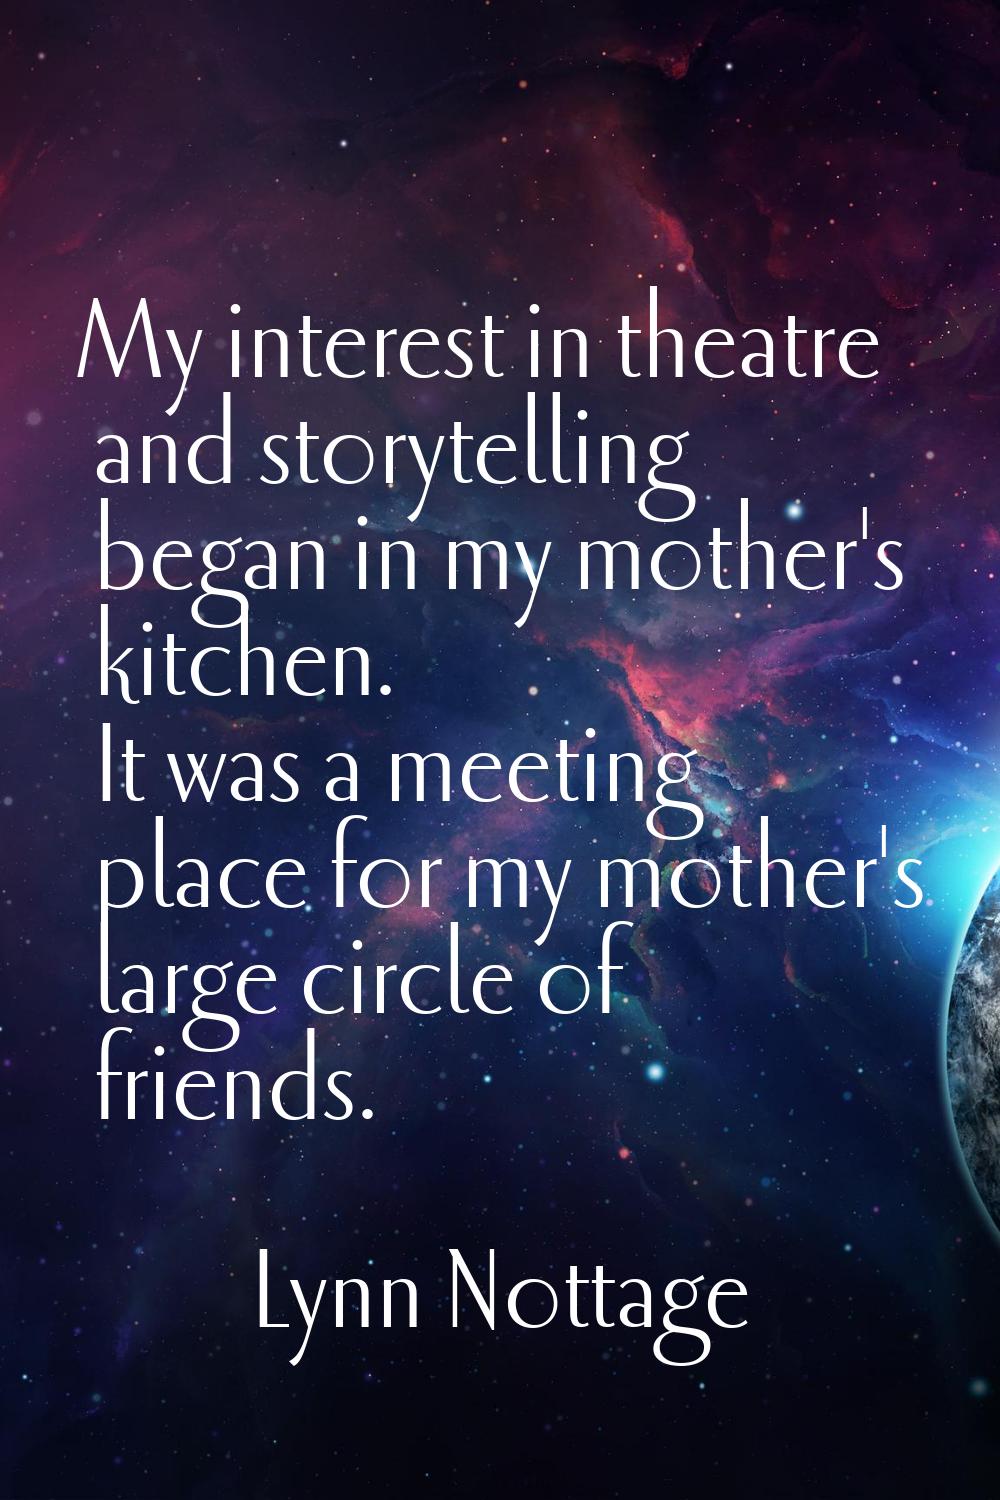 My interest in theatre and storytelling began in my mother's kitchen. It was a meeting place for my